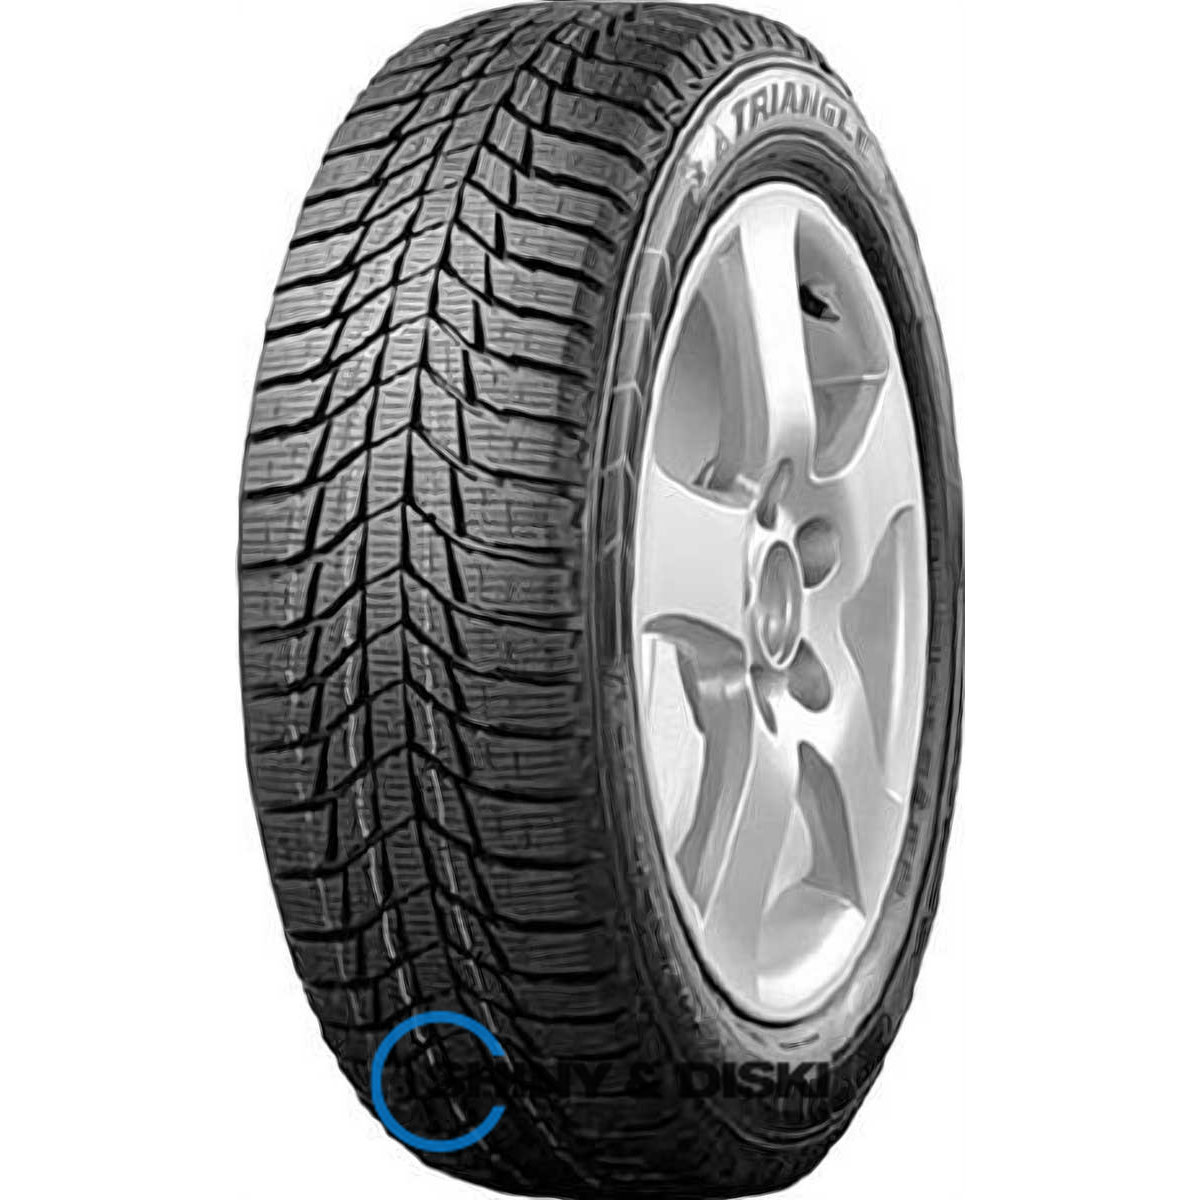 покрышки triangle pl01 205/60 r16 99t xl